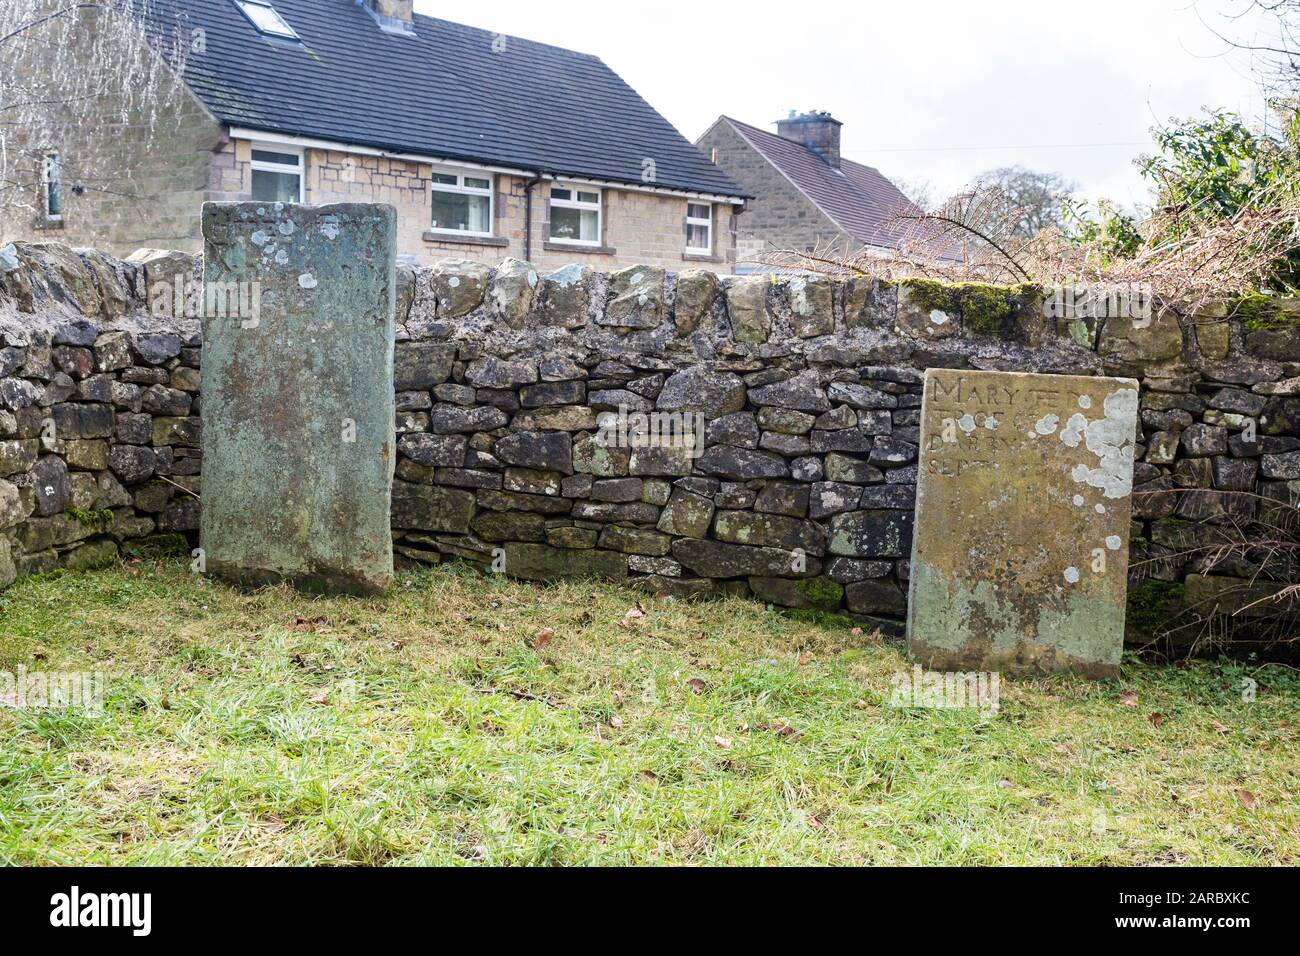 The Lydgate Graves of George Darby and his daughter Mary, Eyam plague village, Derbyshire, UK Stock Photo